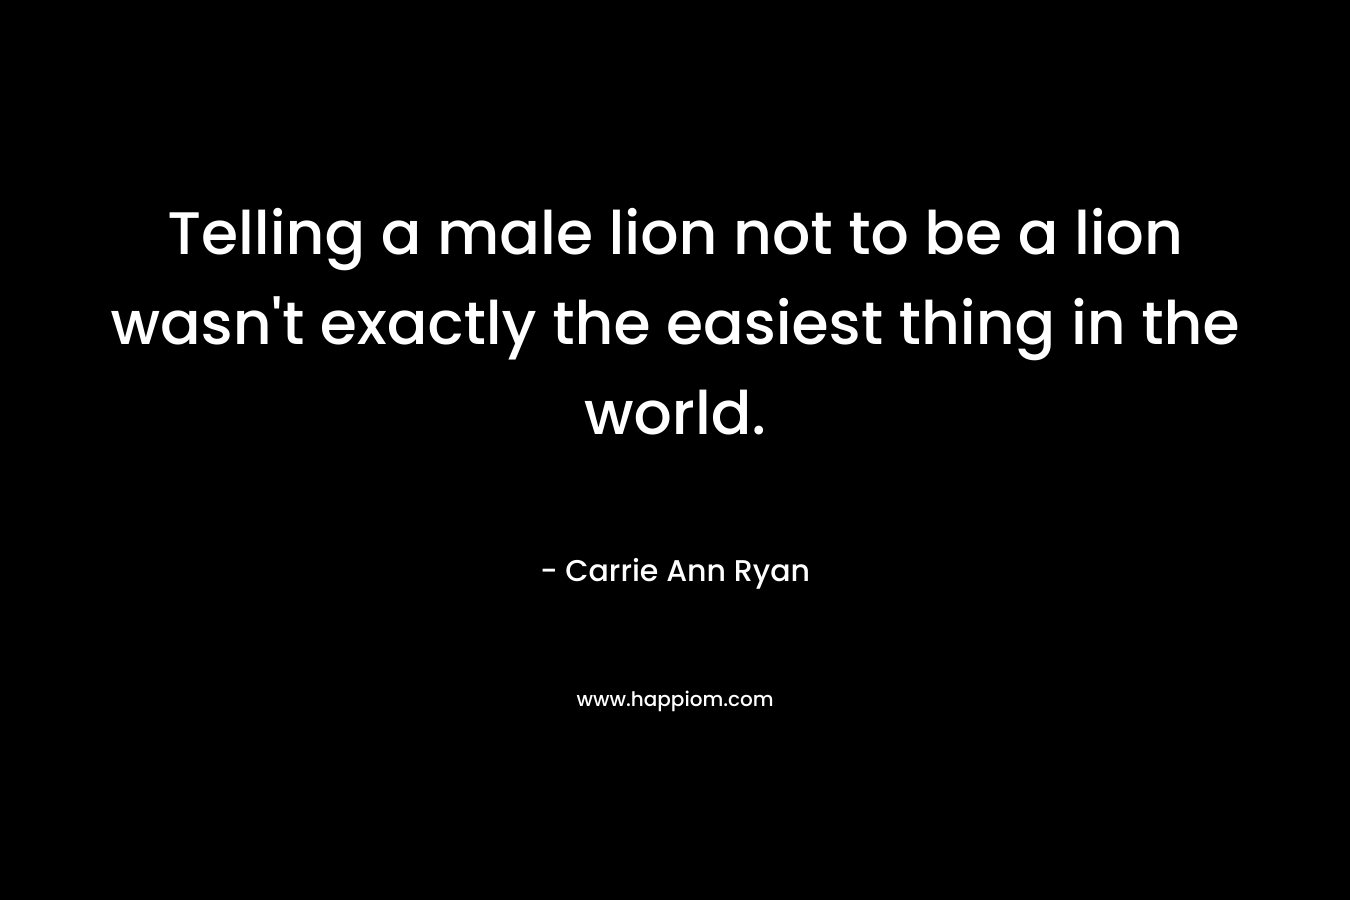 Telling a male lion not to be a lion wasn't exactly the easiest thing in the world.